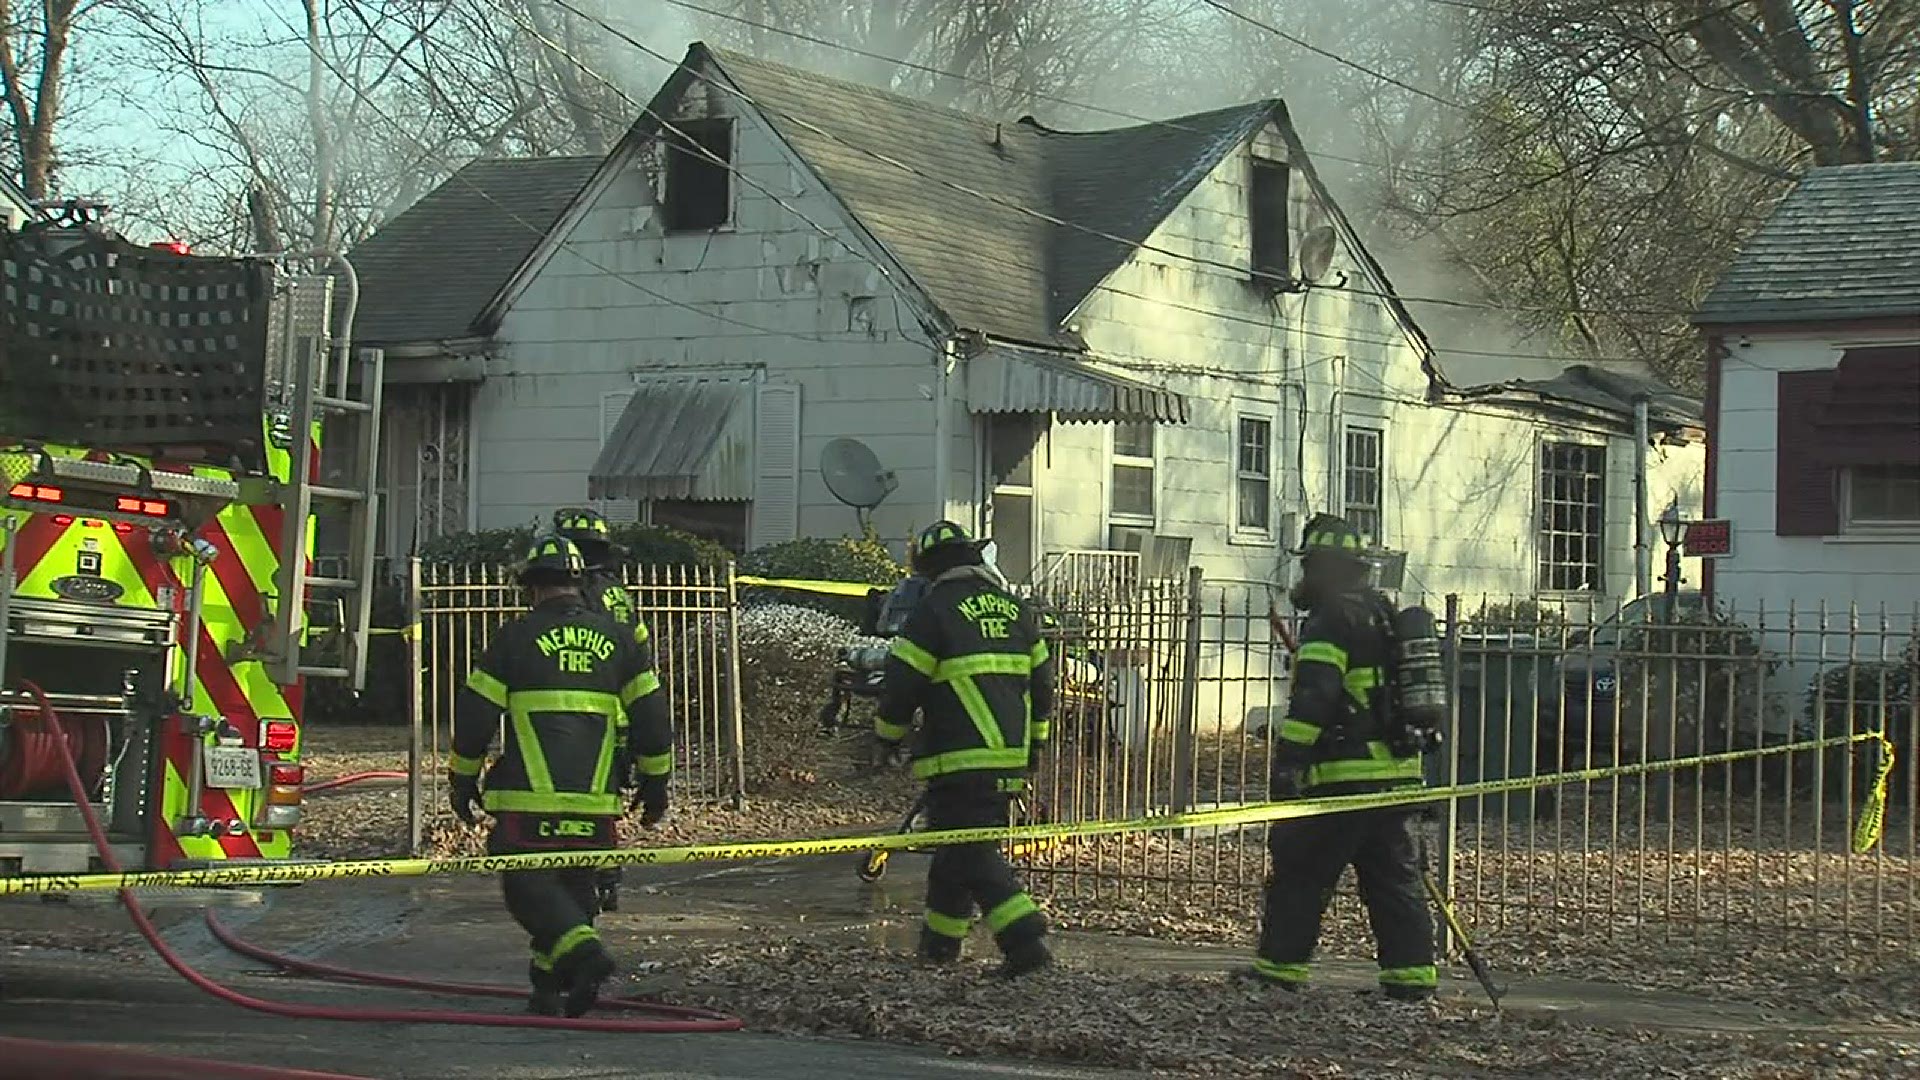 Memphis fire investigators are trying to determine the cause of the fire.